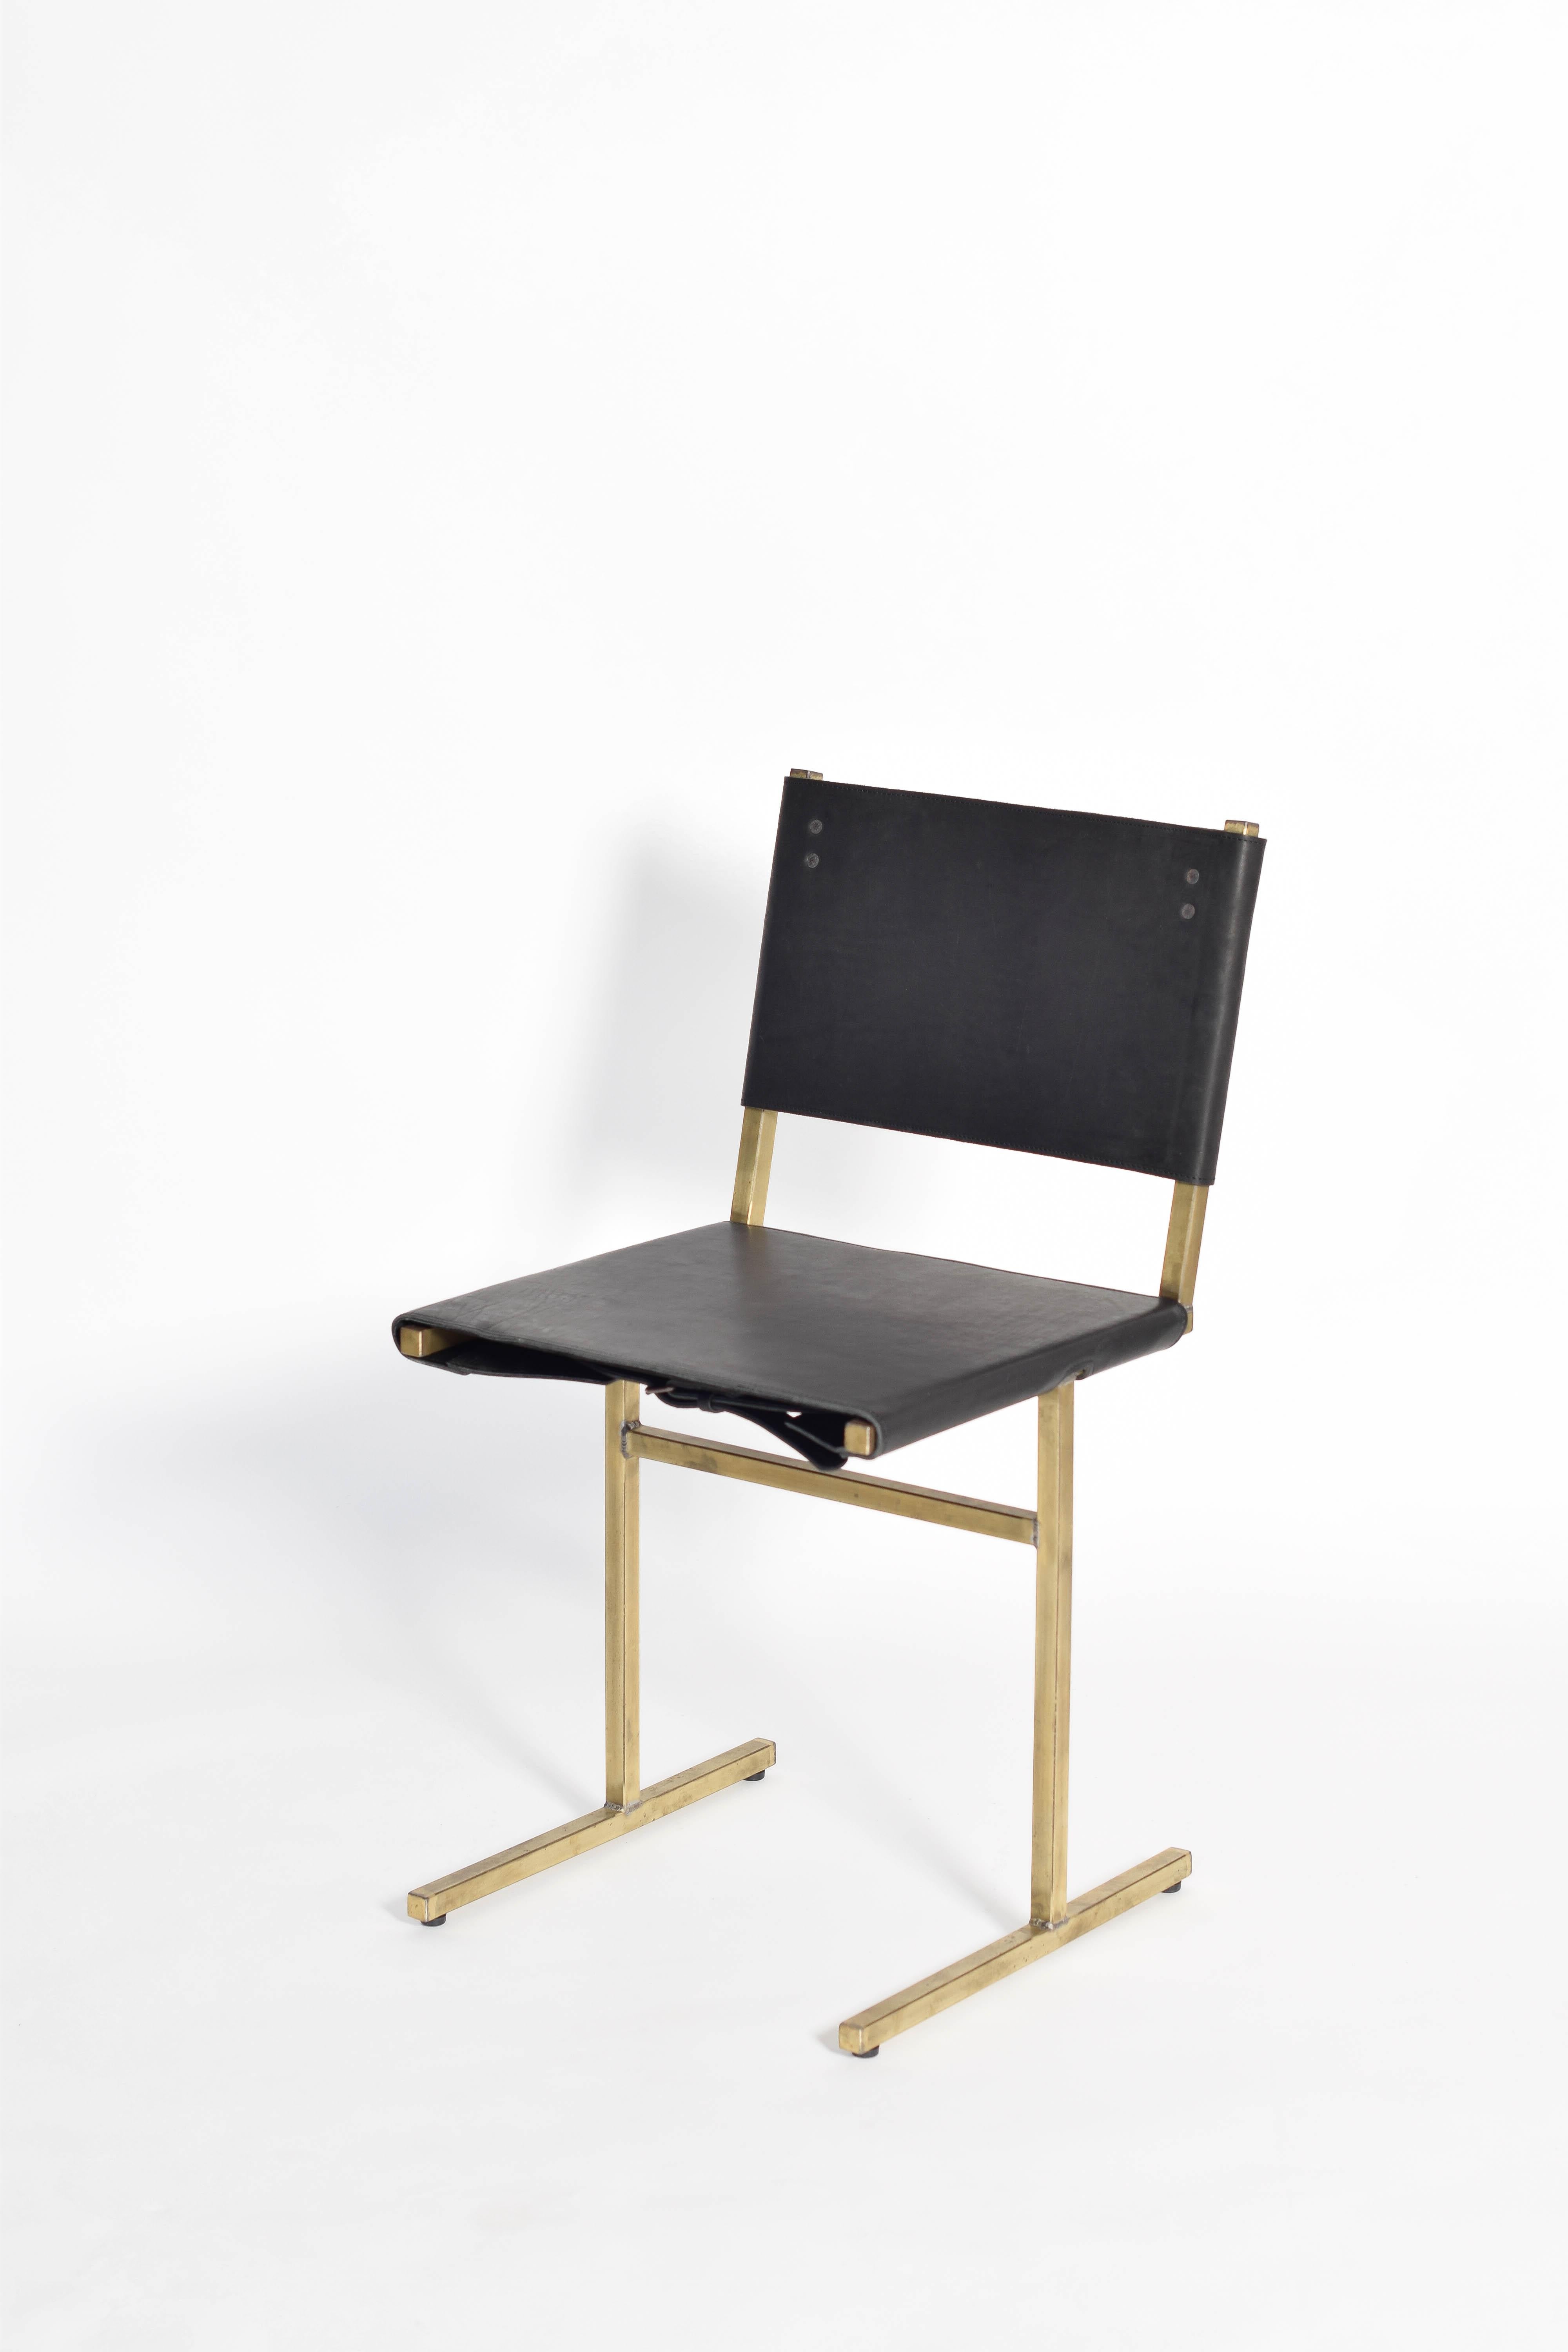 Black and brass memento chair, Jesse Sanderson
Original signed chair by Jesse Sanderson
Materials: Leather, brass steel
Dimensions: w 43 x D 50 x H 80 cm
seating height: 47 cm.
Five lines and a circle – the human body can be as simple as the